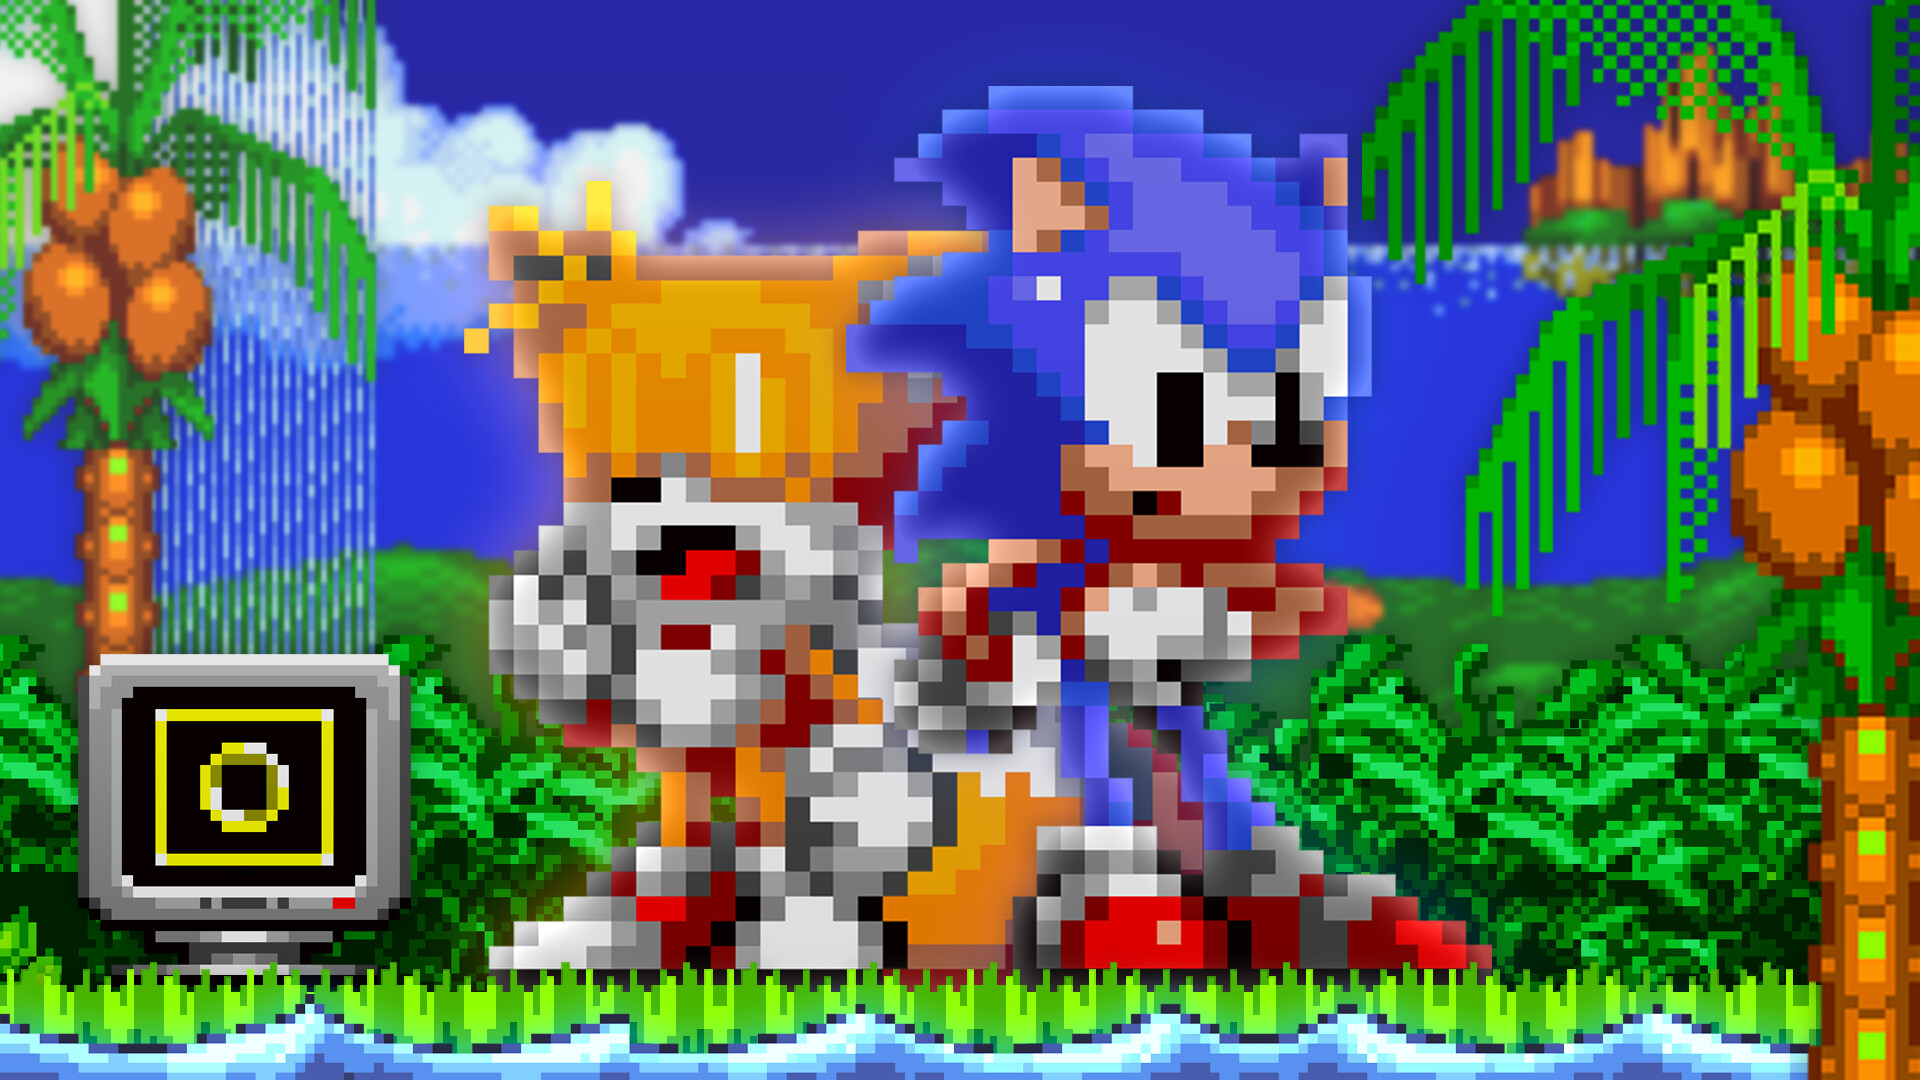 ArtStation - A Bunch Of Sonic Advance-Styled Sprites